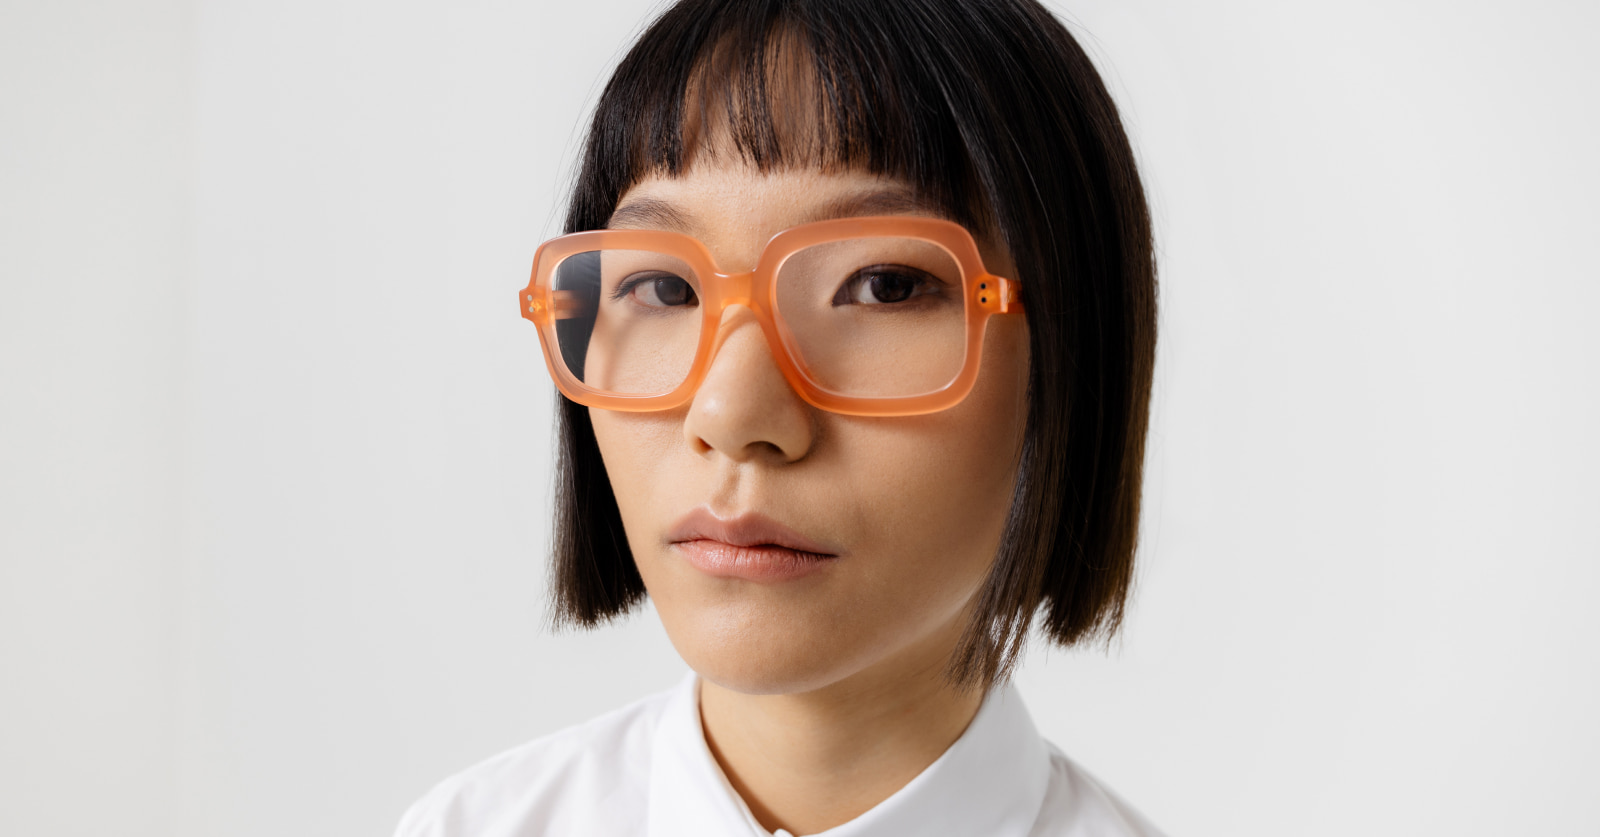 What To Know About About Anti-reflective Lenses For Glasses